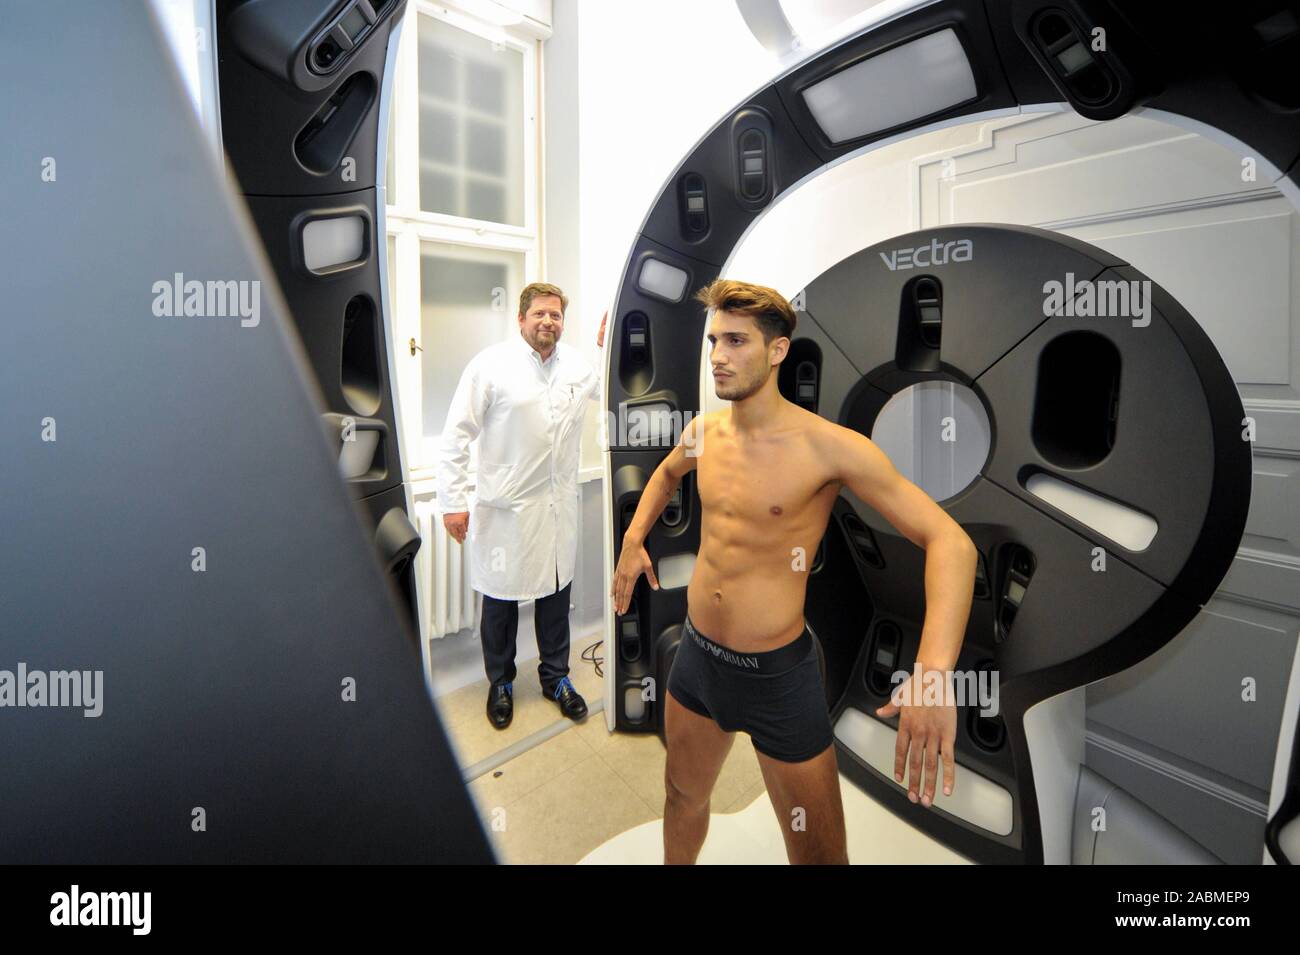 https://c8.alamy.com/comp/2ABMEP9/presentation-of-germanys-first-3d-full-body-scanner-in-the-department-of-hand-plastic-and-aesthetic-surgery-at-the-university-hospital-of-munich-in-pettenkoferstrae-the-picture-shows-prof-dr-riccardo-giunta-director-of-the-department-of-plastic-surgery-with-a-model-automated-translation-2ABMEP9.jpg